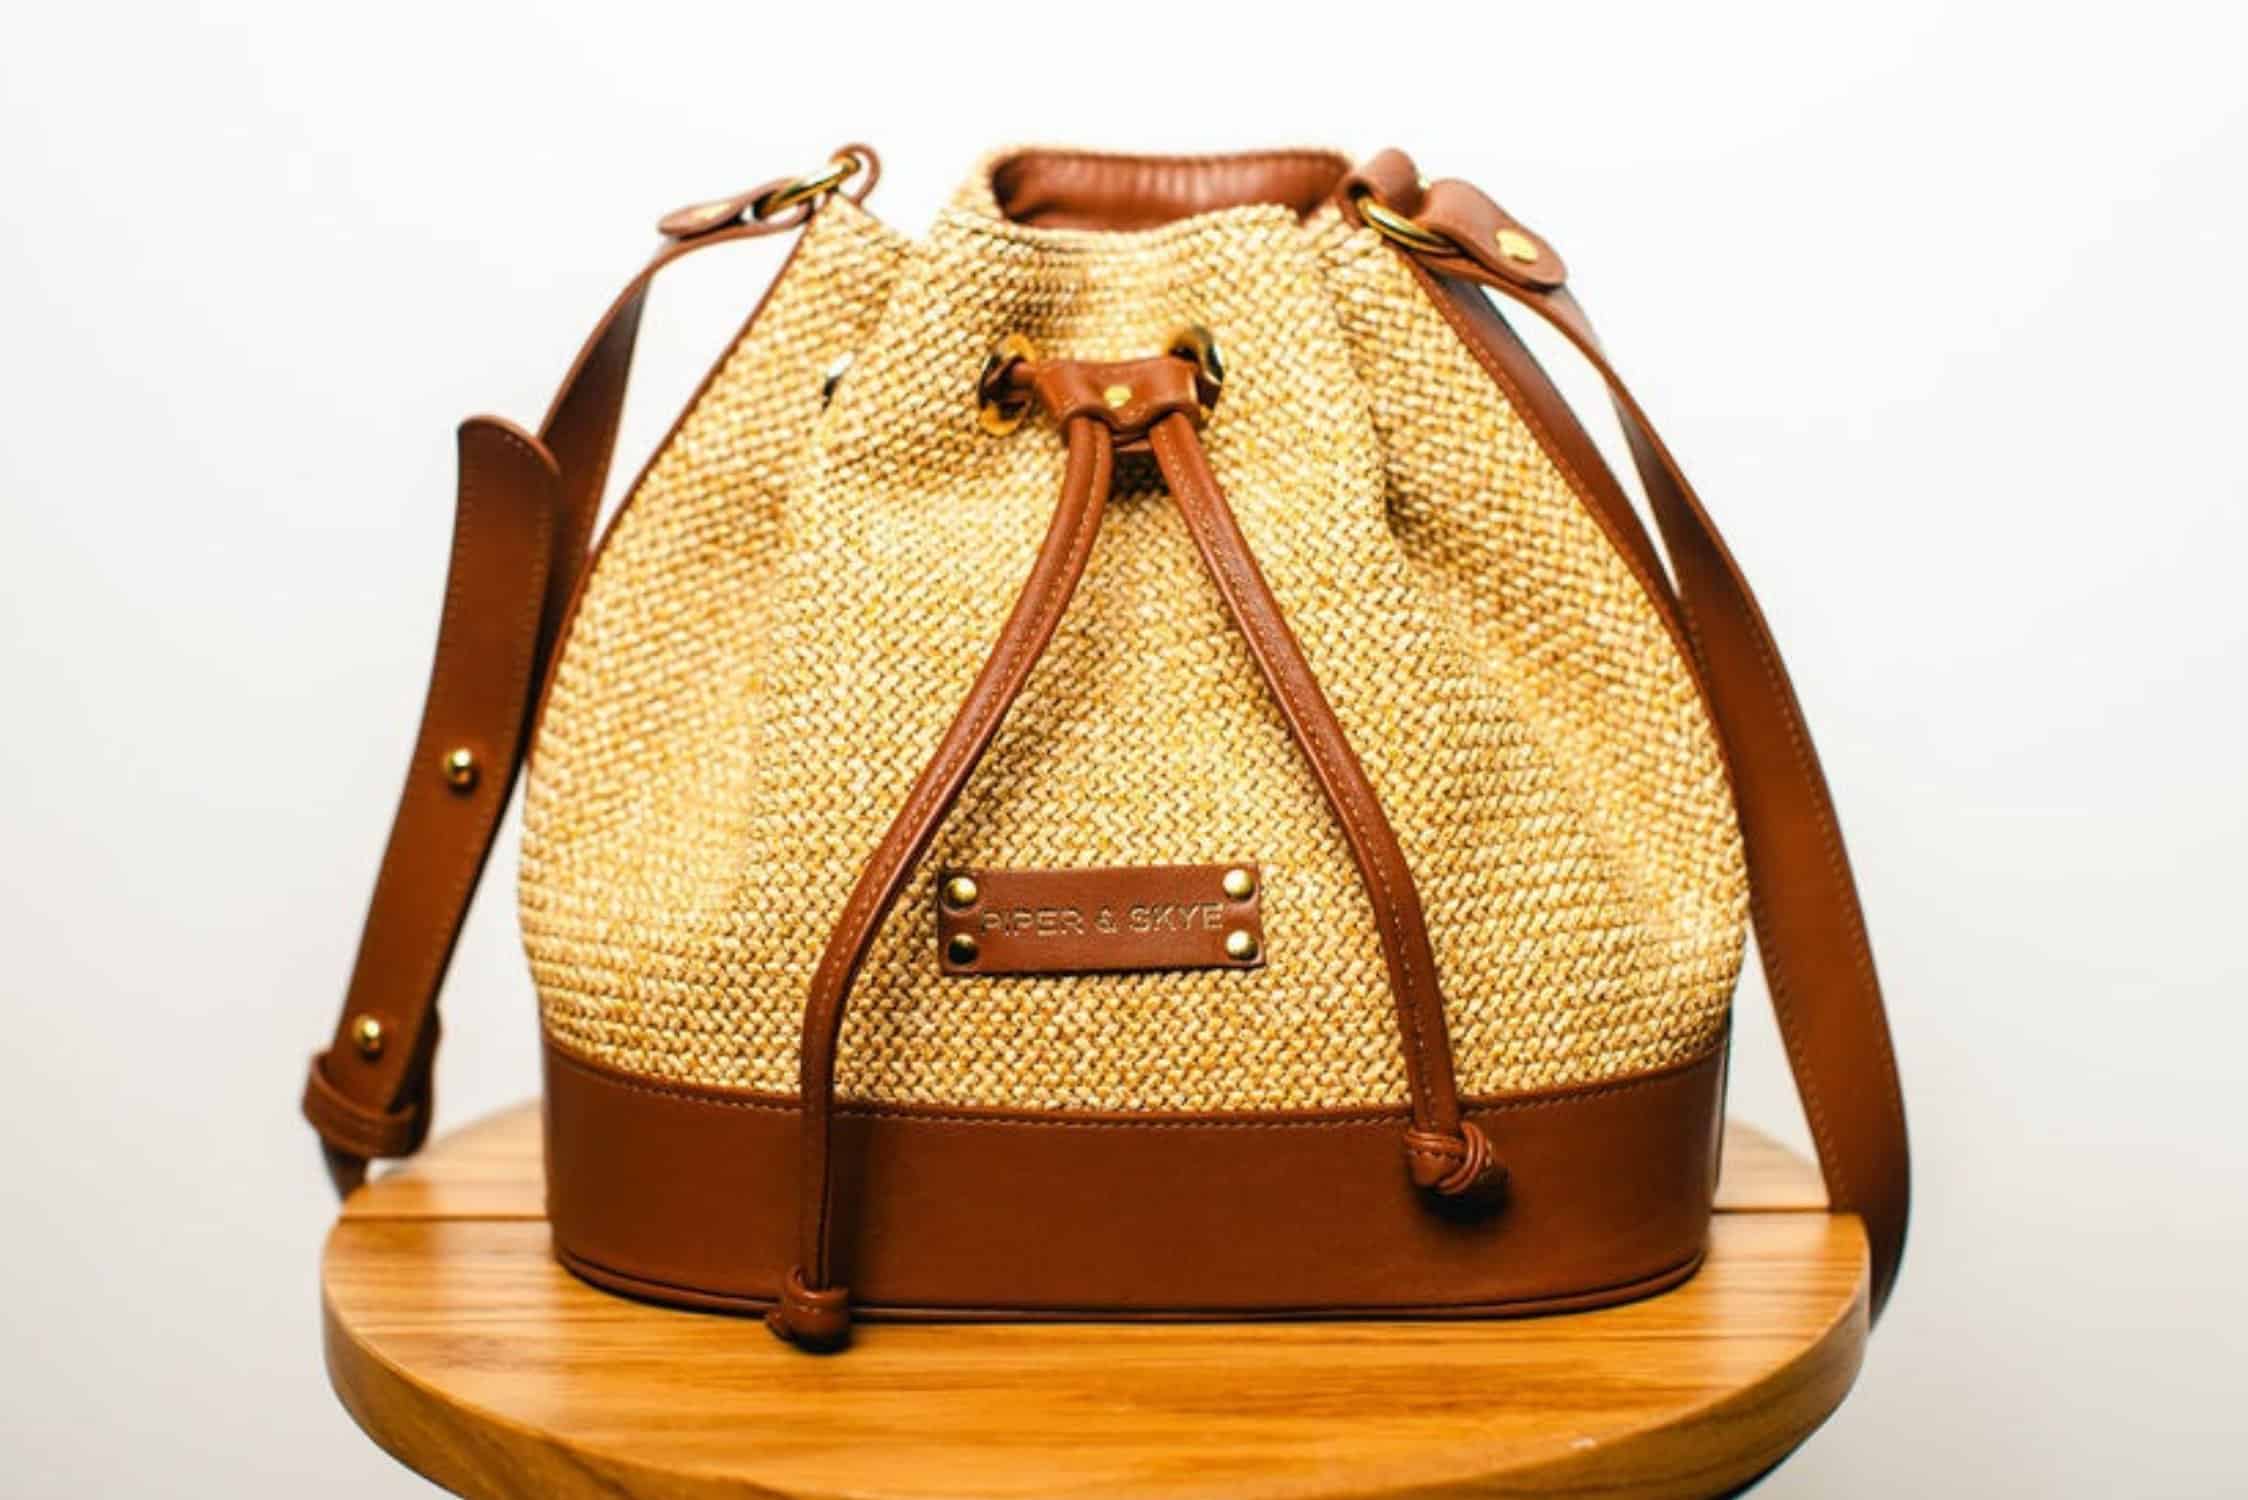 Piper & Skye, bags, sustainable brands